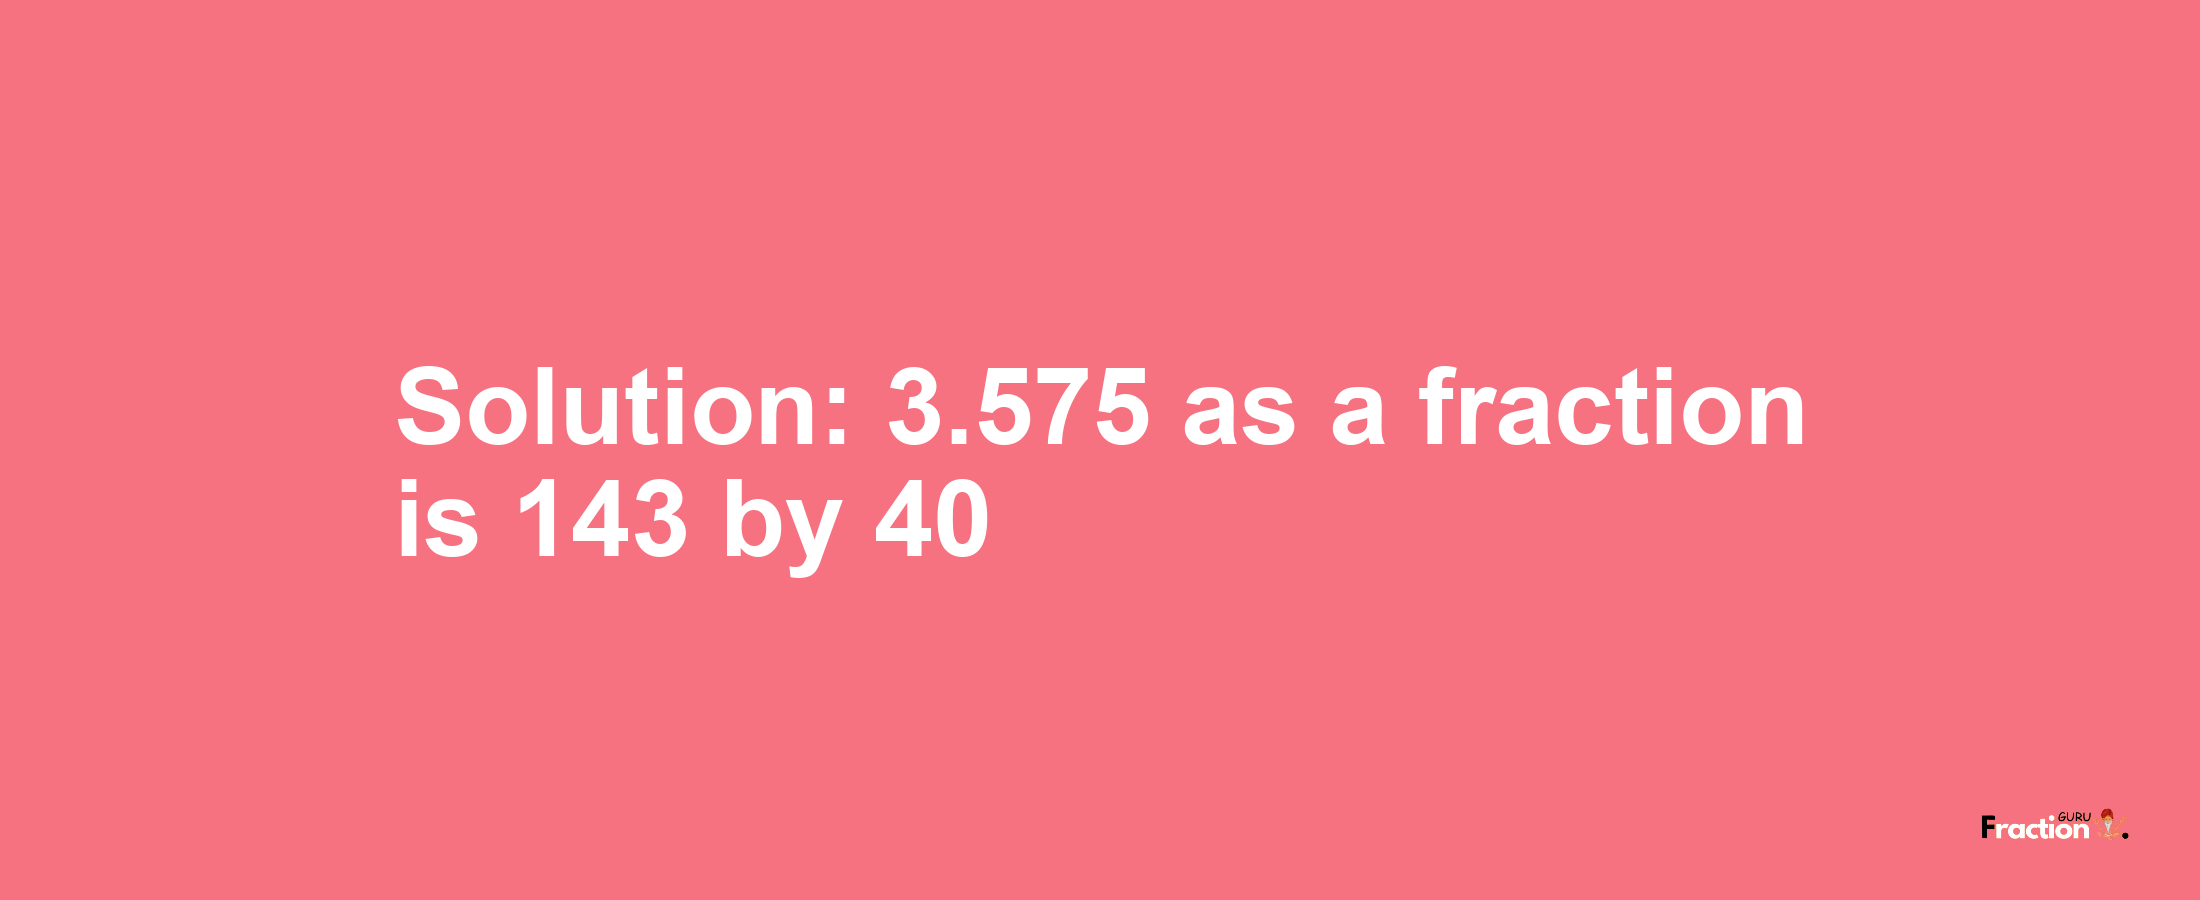 Solution:3.575 as a fraction is 143/40